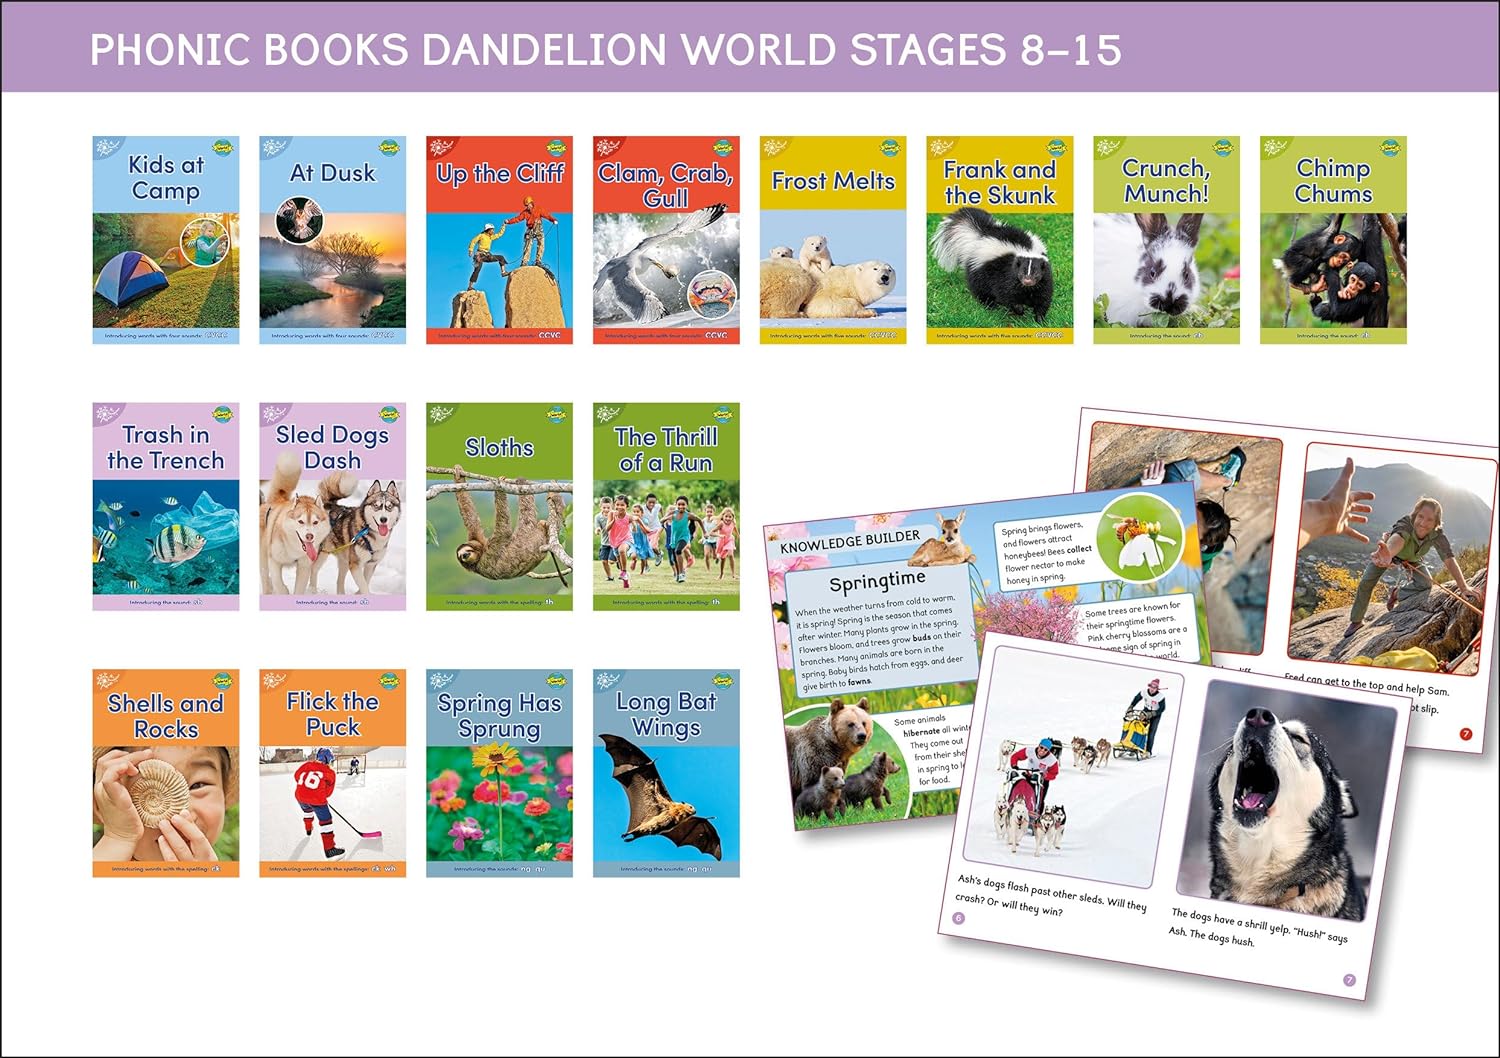 Phonic Books Dandelion World Stages 8-15